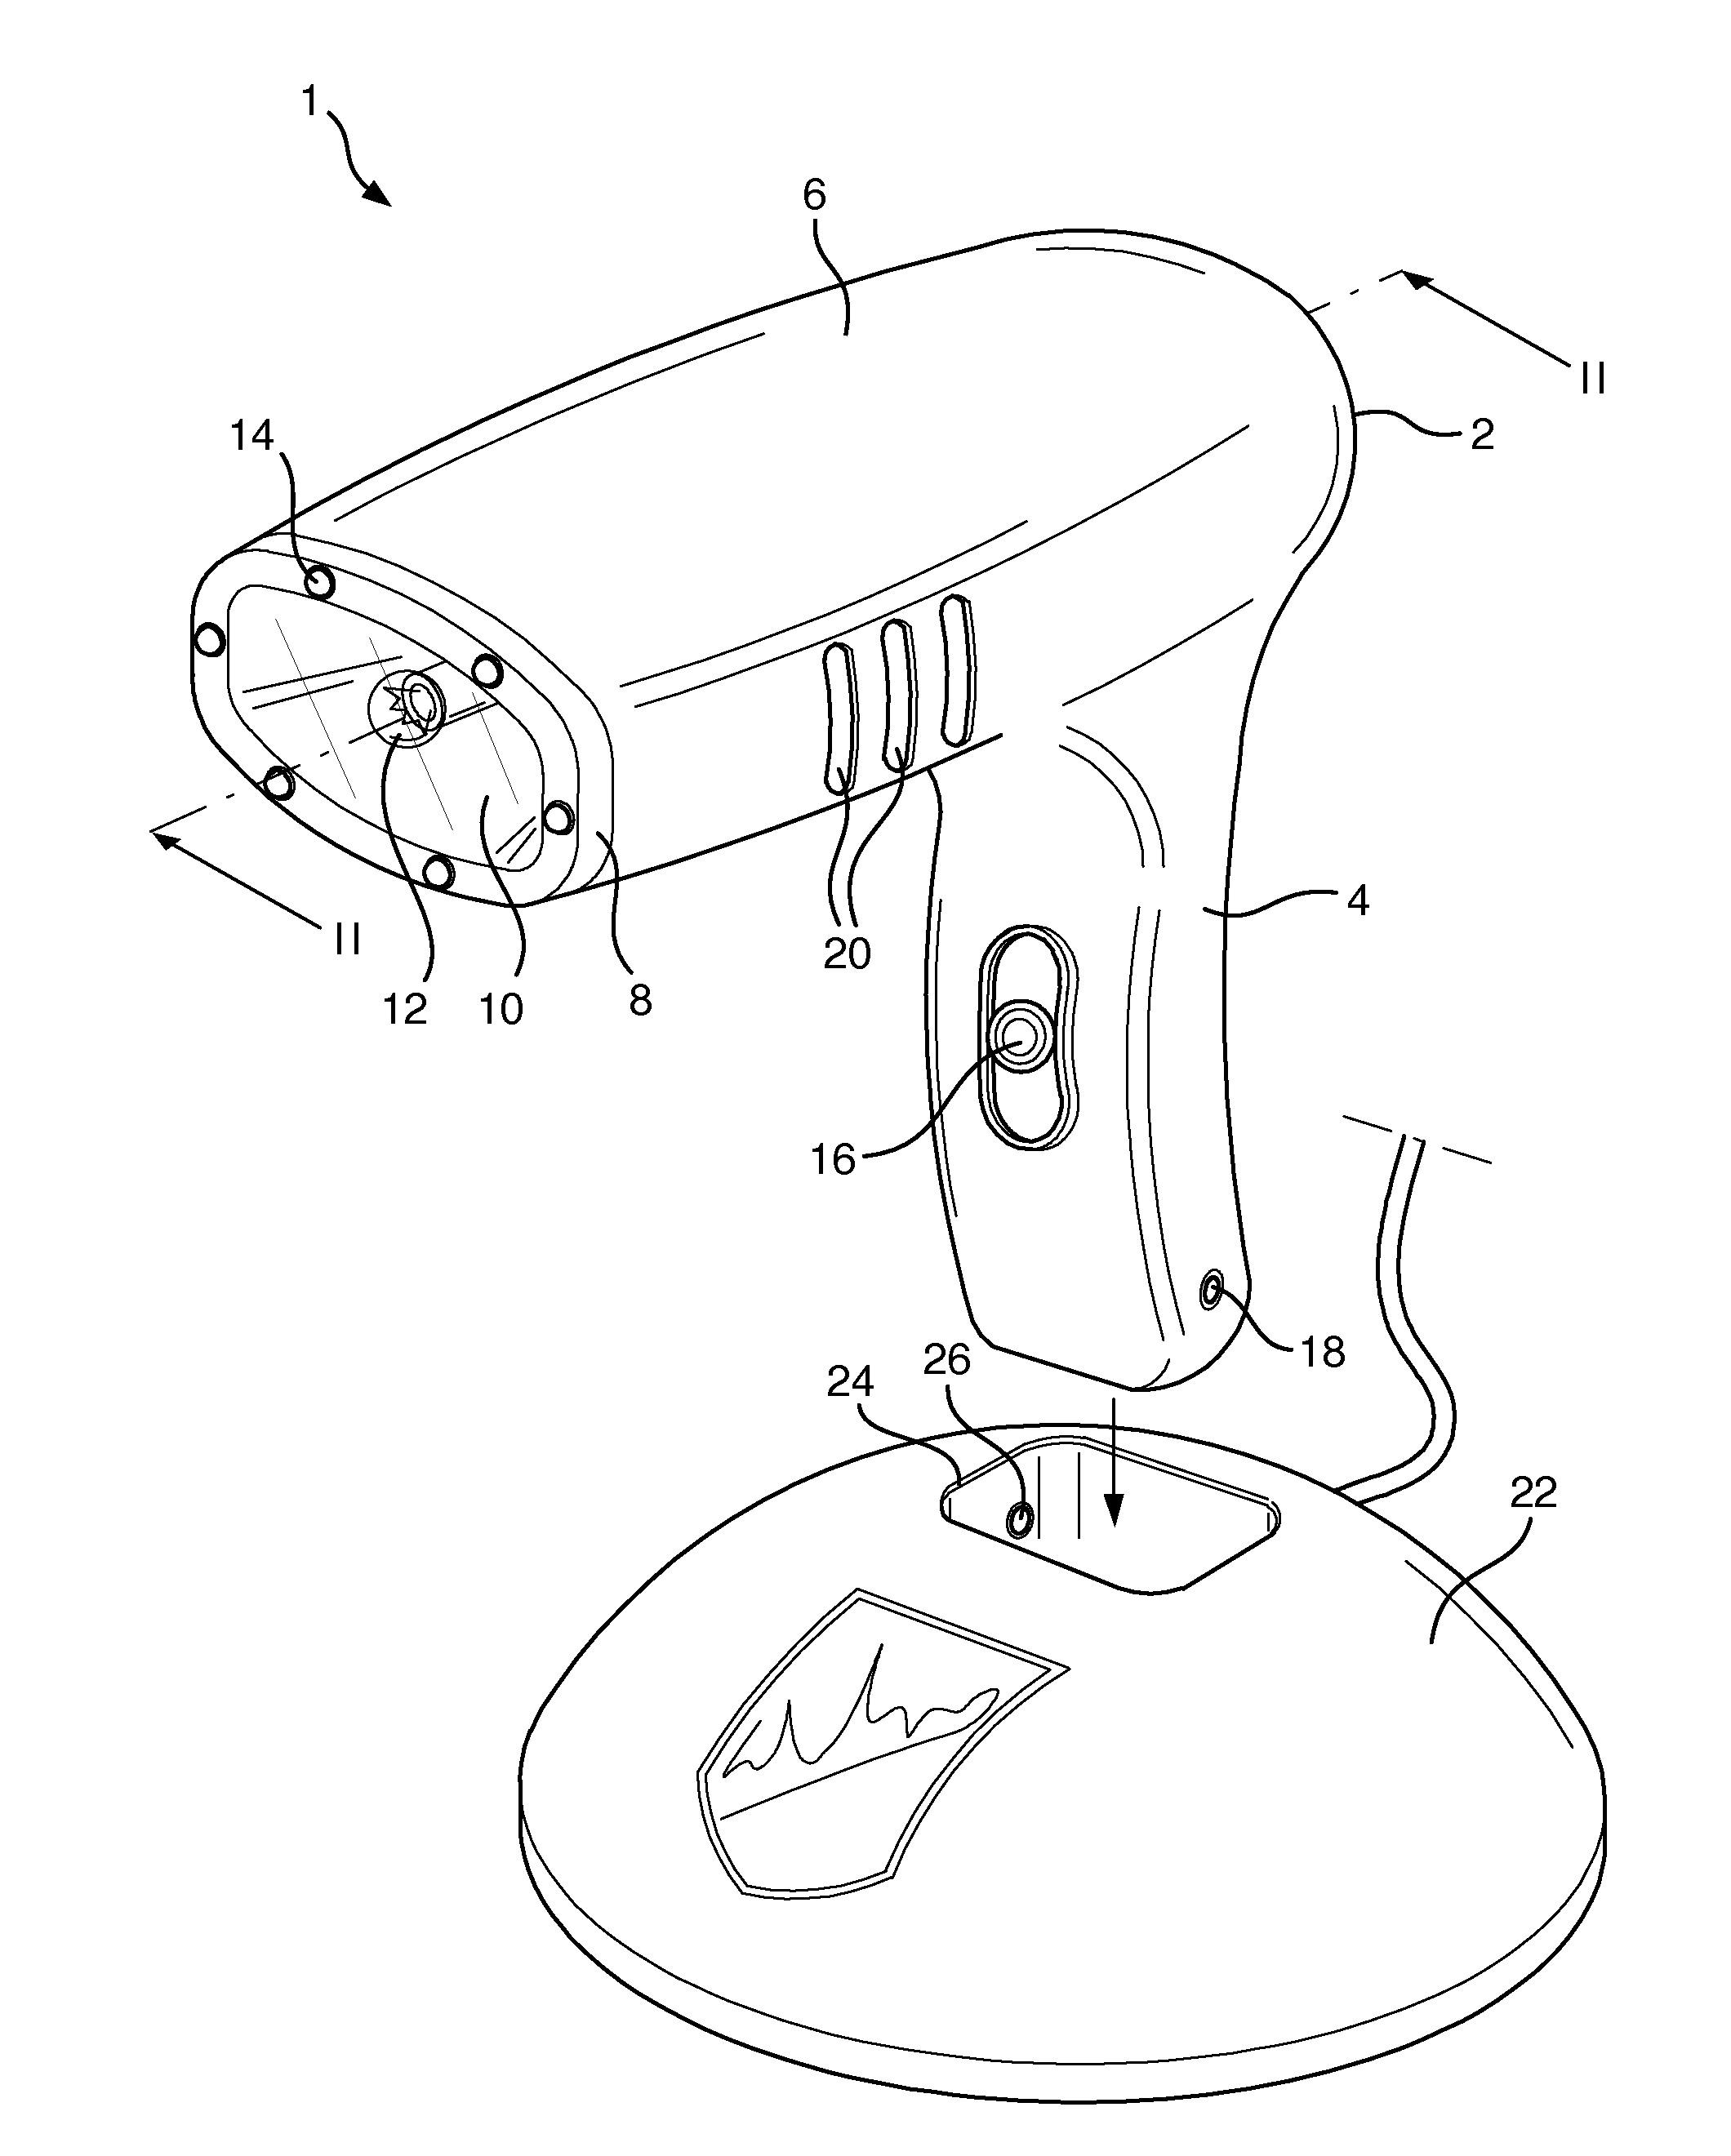 Electromagnetic skin treatment device